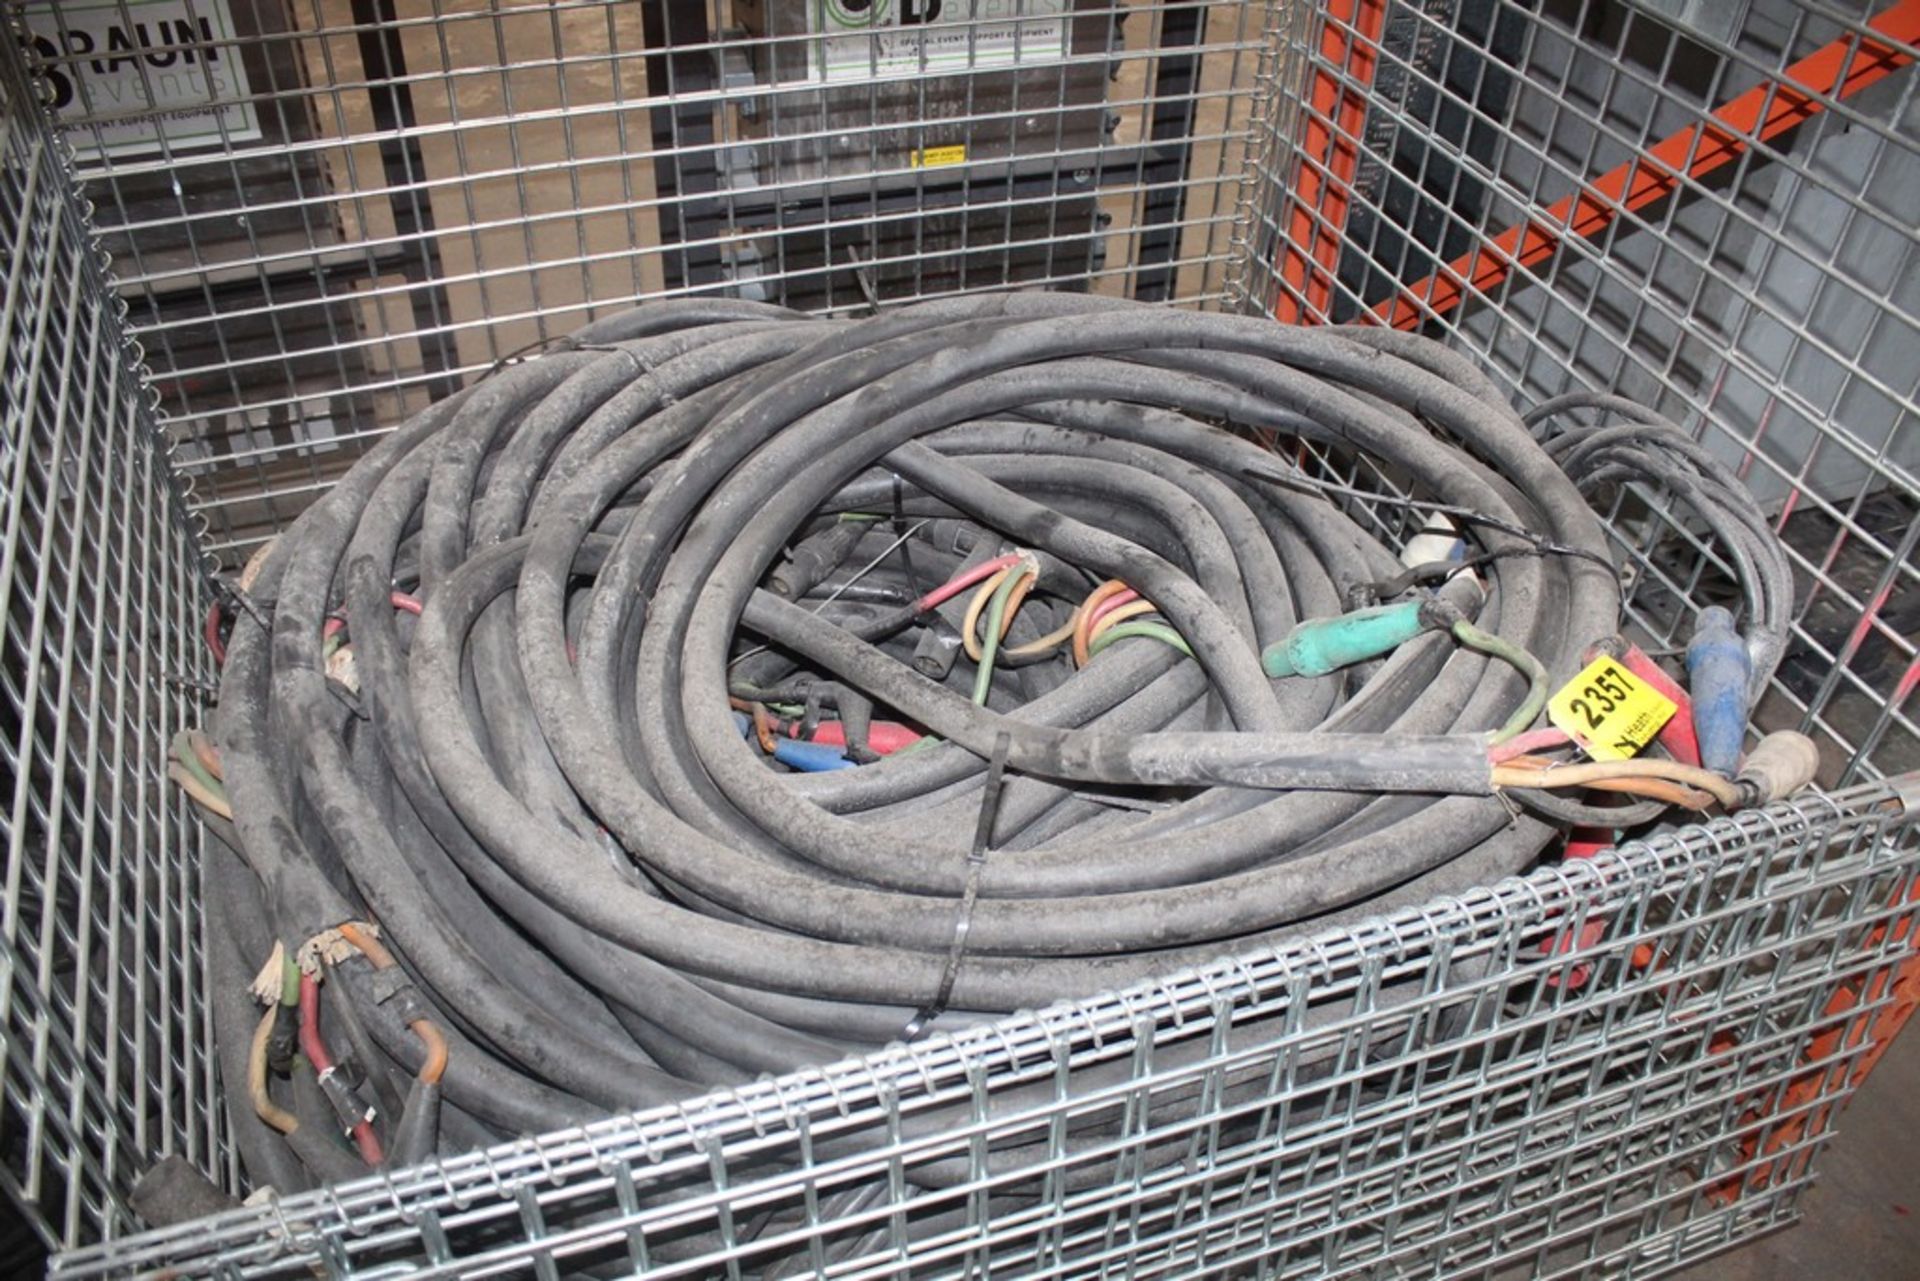 LARGE HEAVY DUTY POWER CABLE (OUT OF SERVICE)